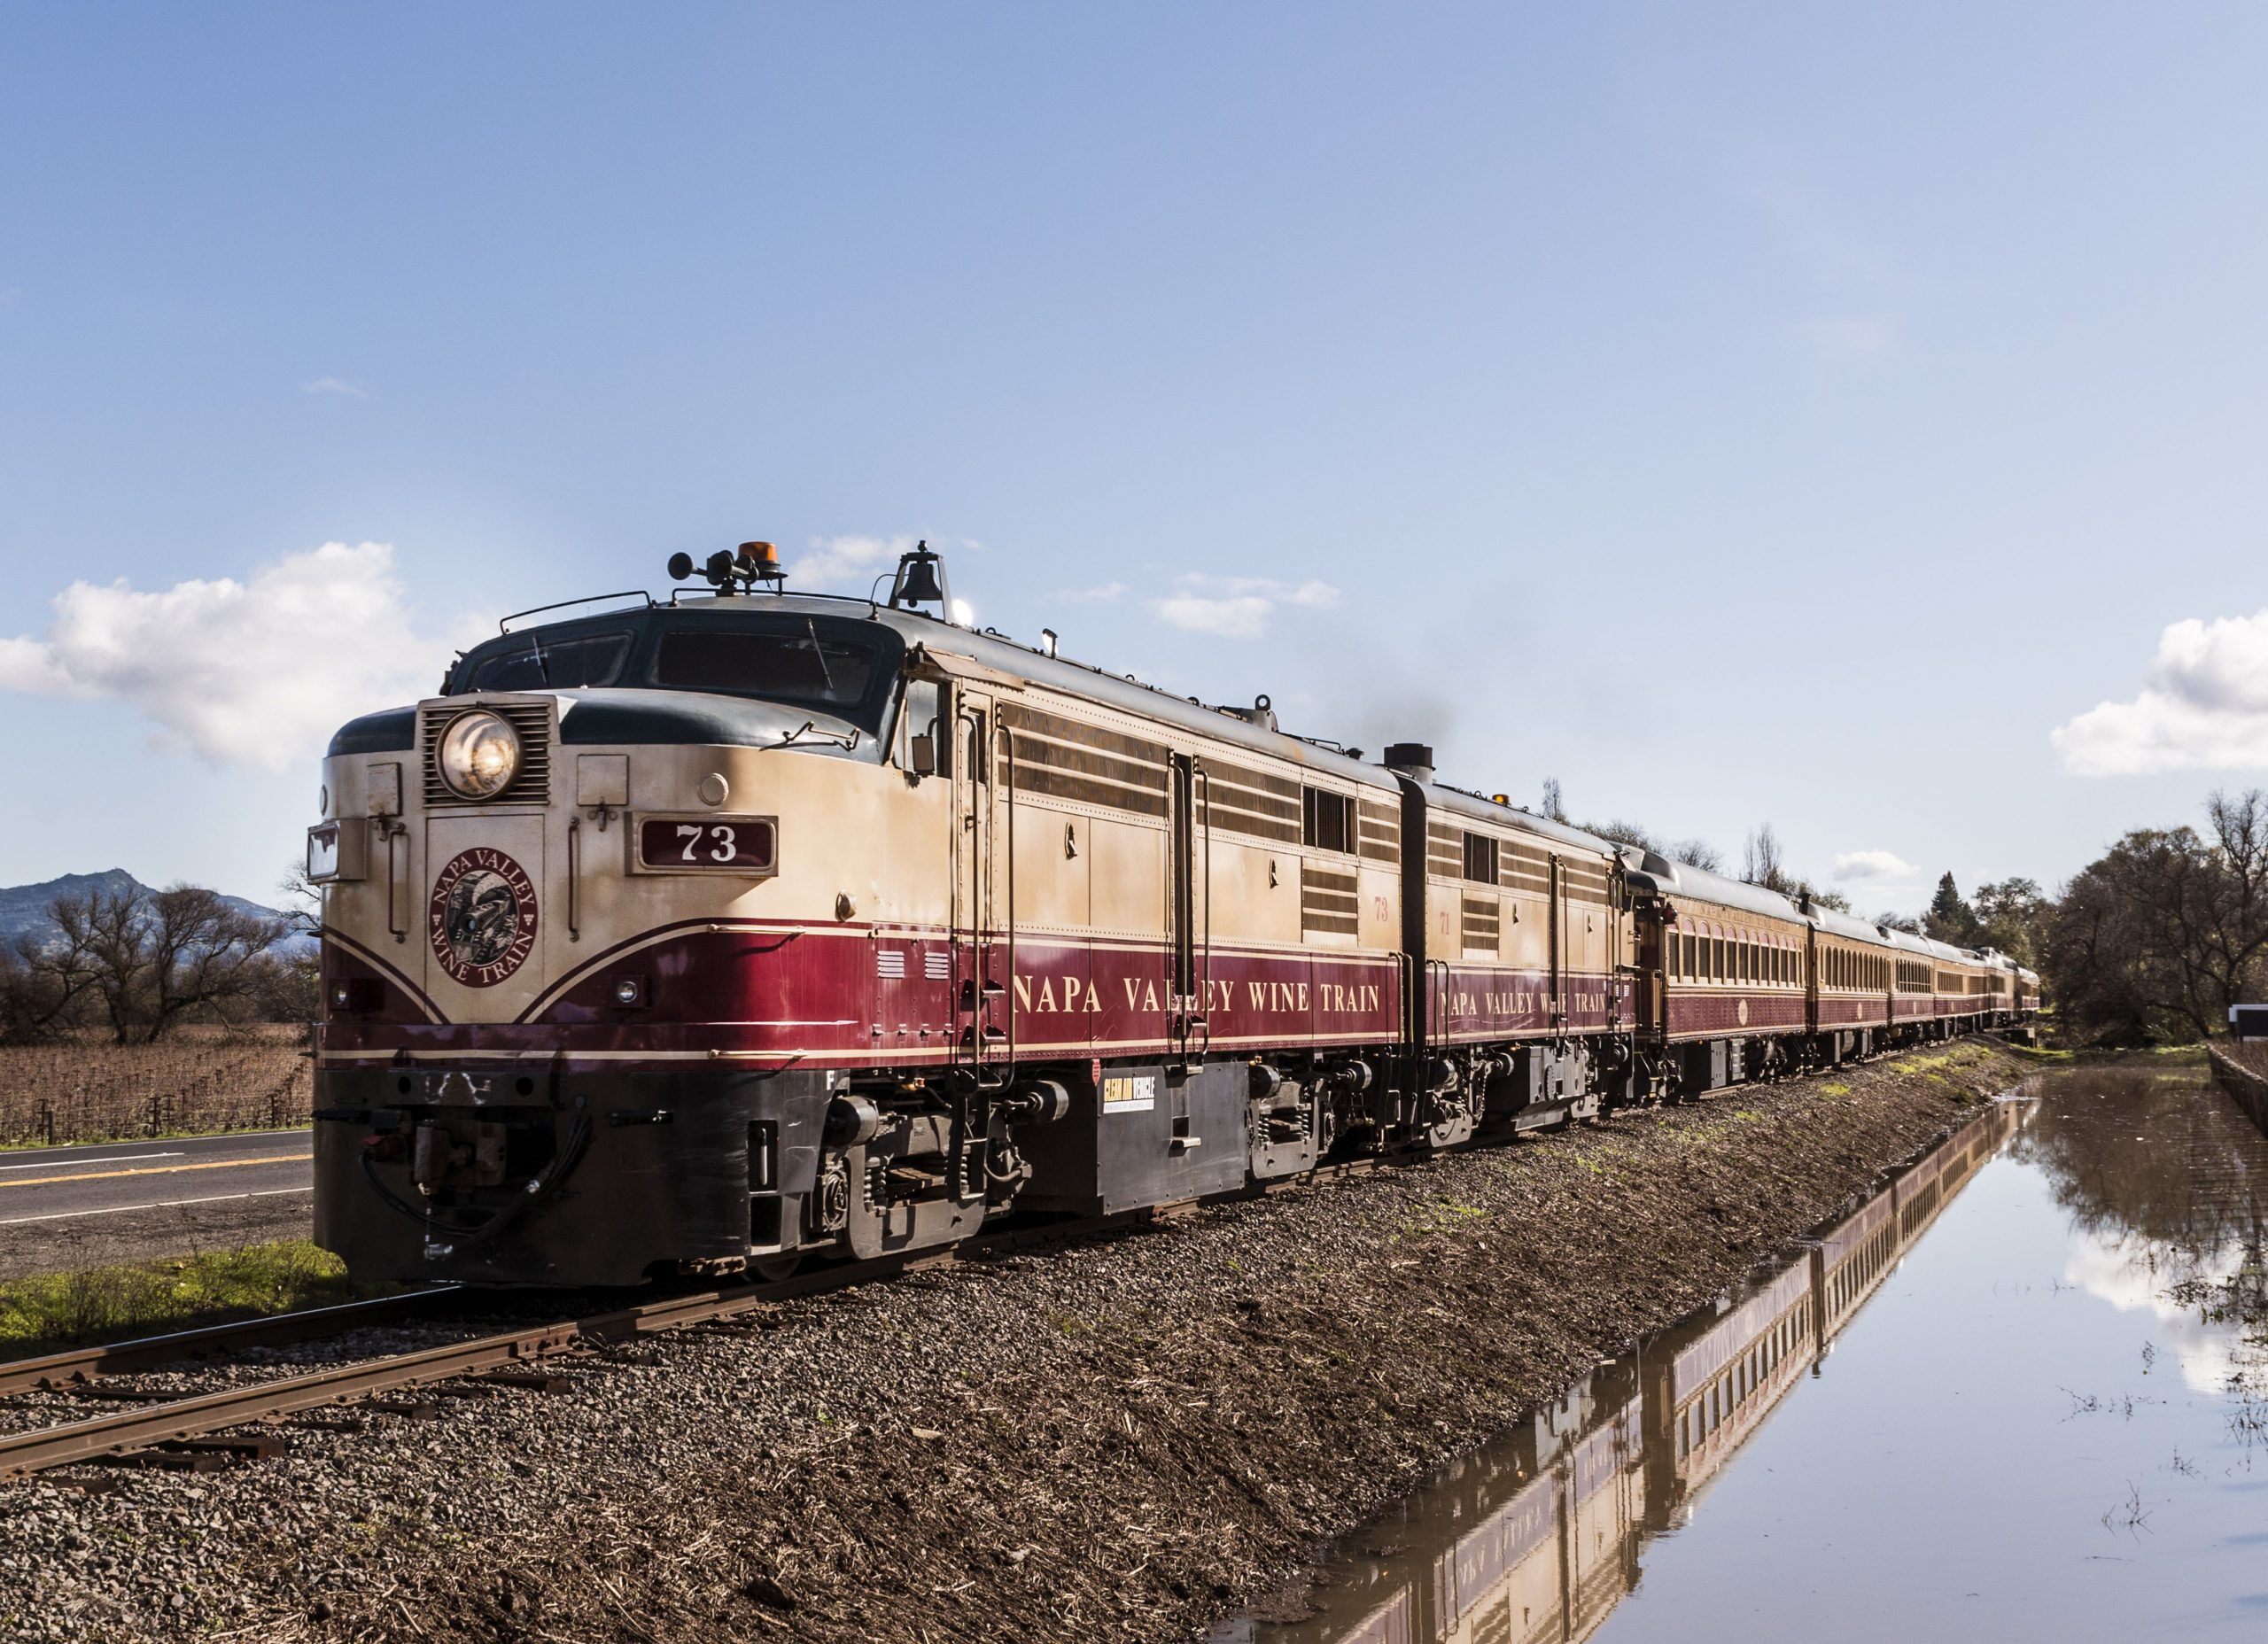 Napa Valley Wine Train: Visitor Guide and Review